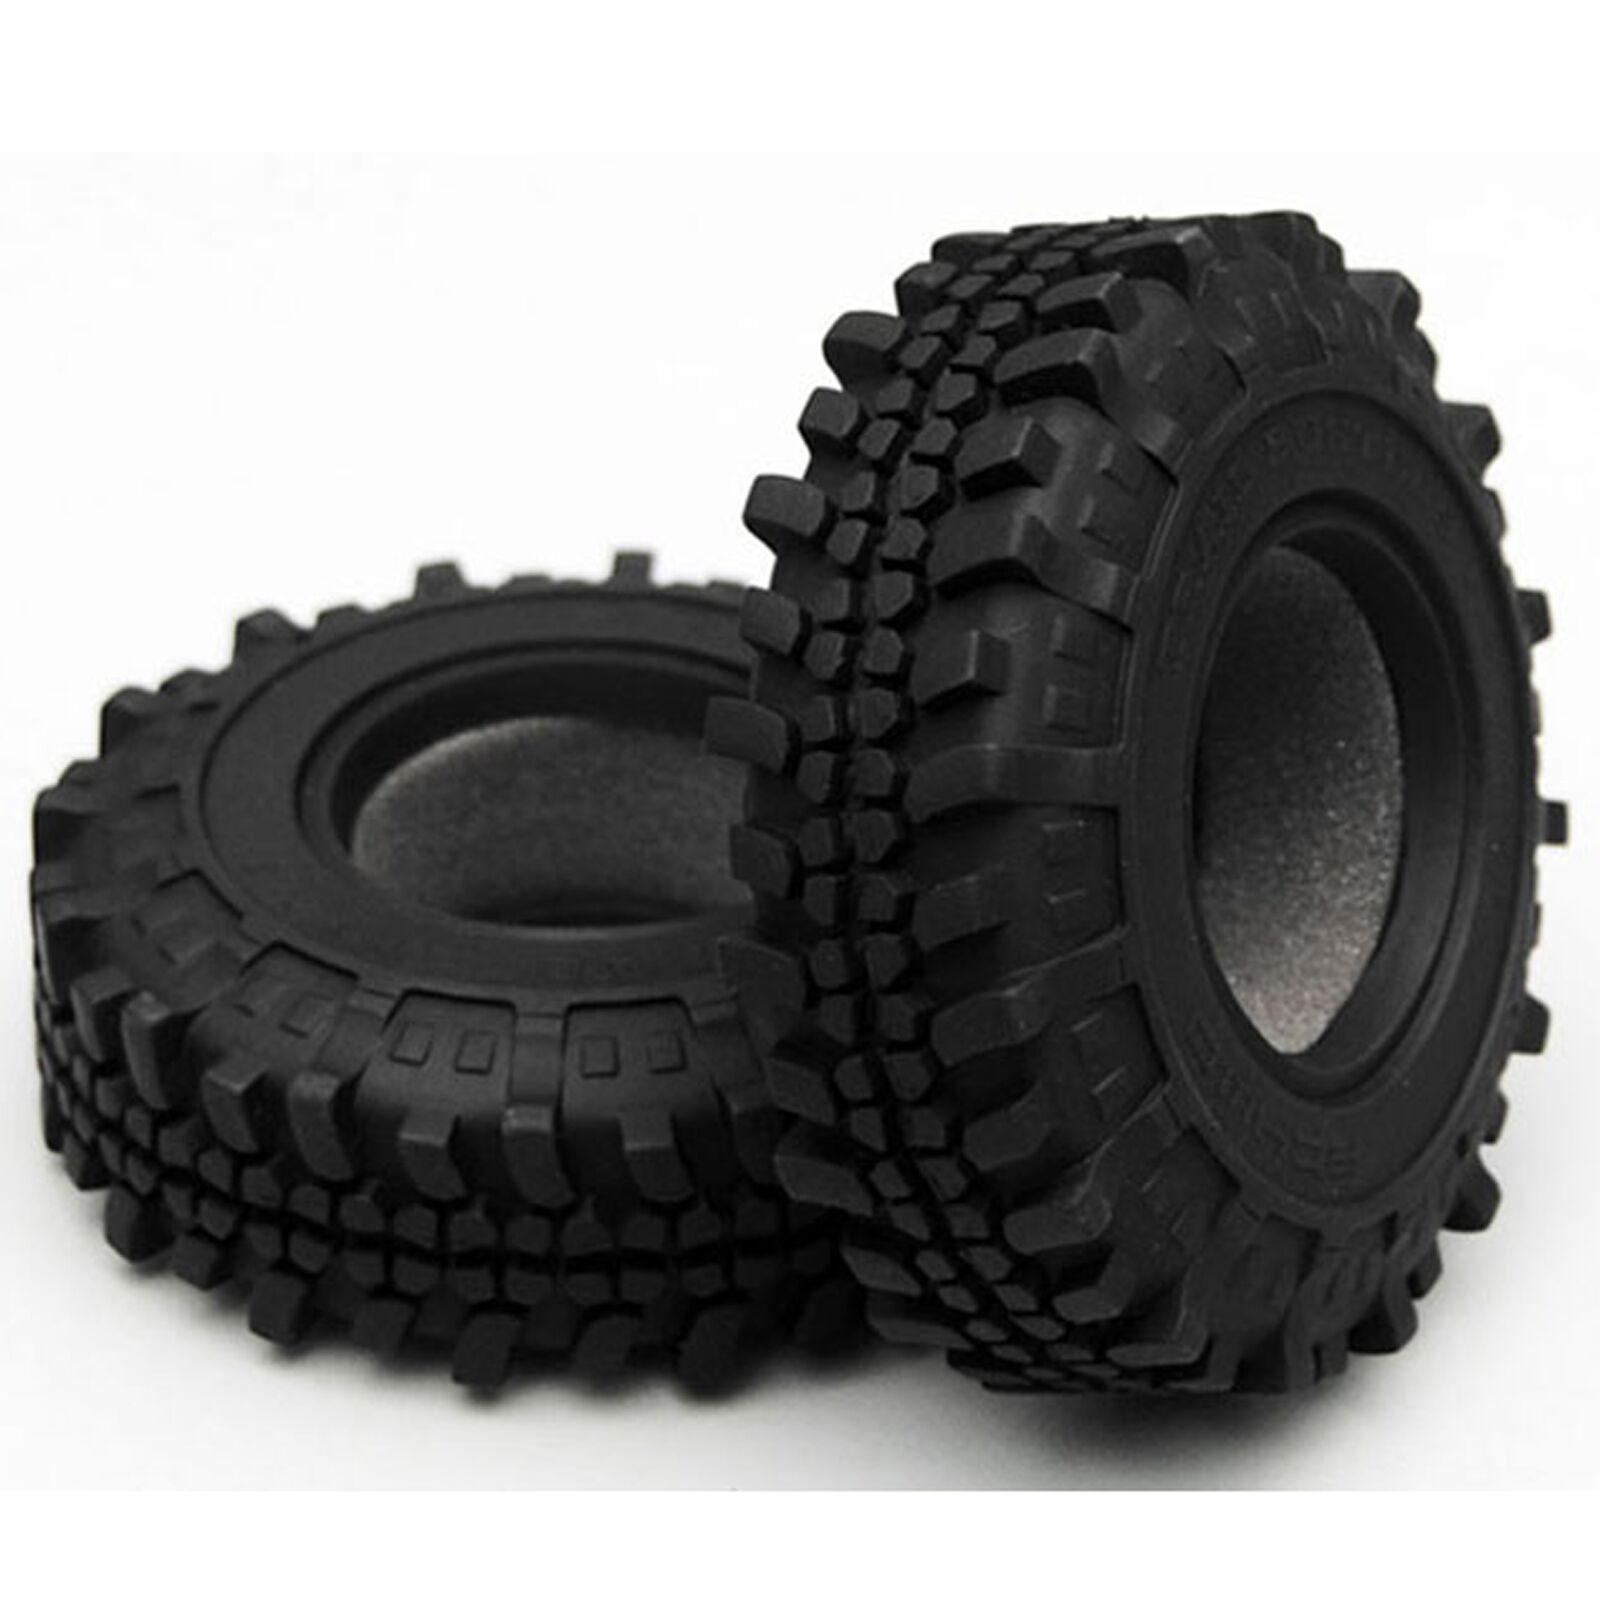 Trail Buster Scale 1.9 Tires